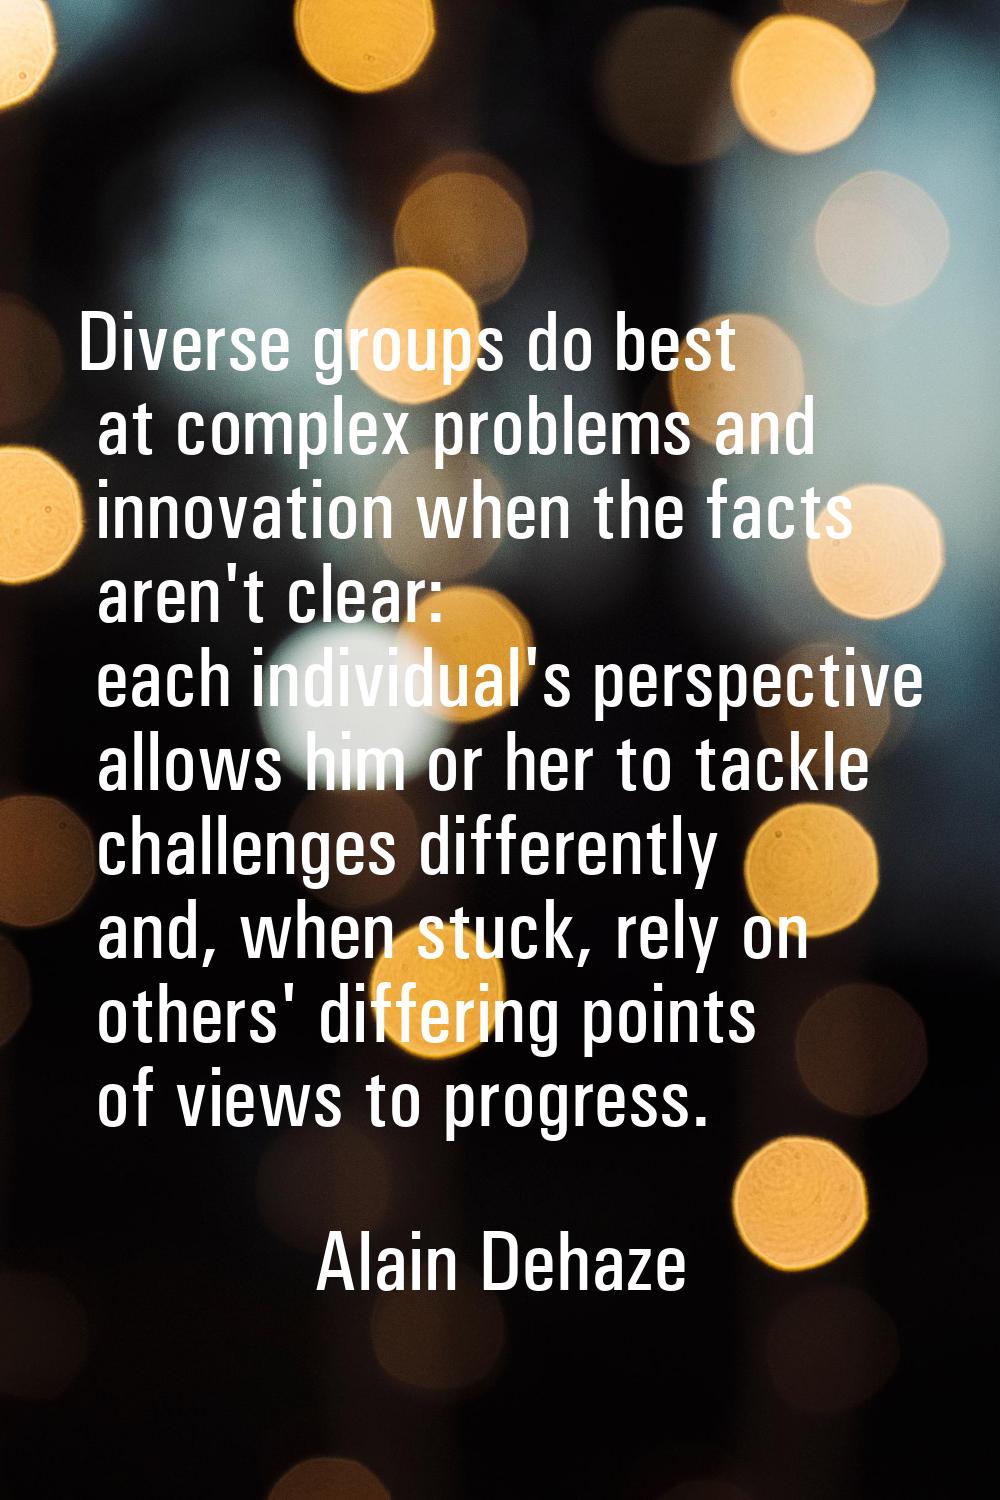 Diverse groups do best at complex problems and innovation when the facts aren't clear: each individ